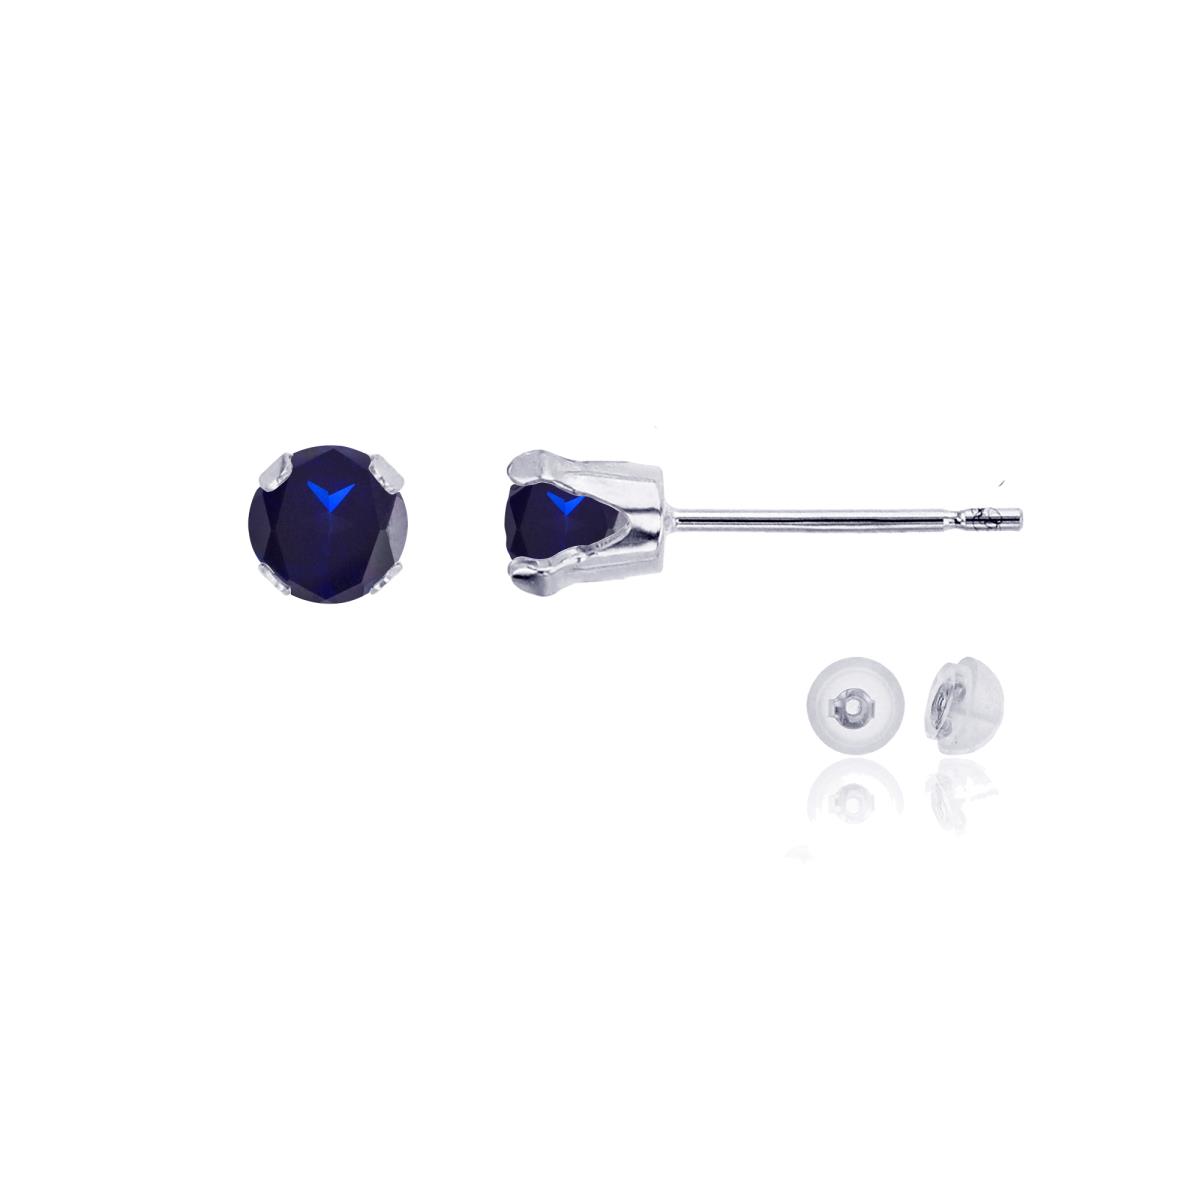 10K White Gold 4mm Round Cr Blue Sapphire Stud Earring with Silicone Back